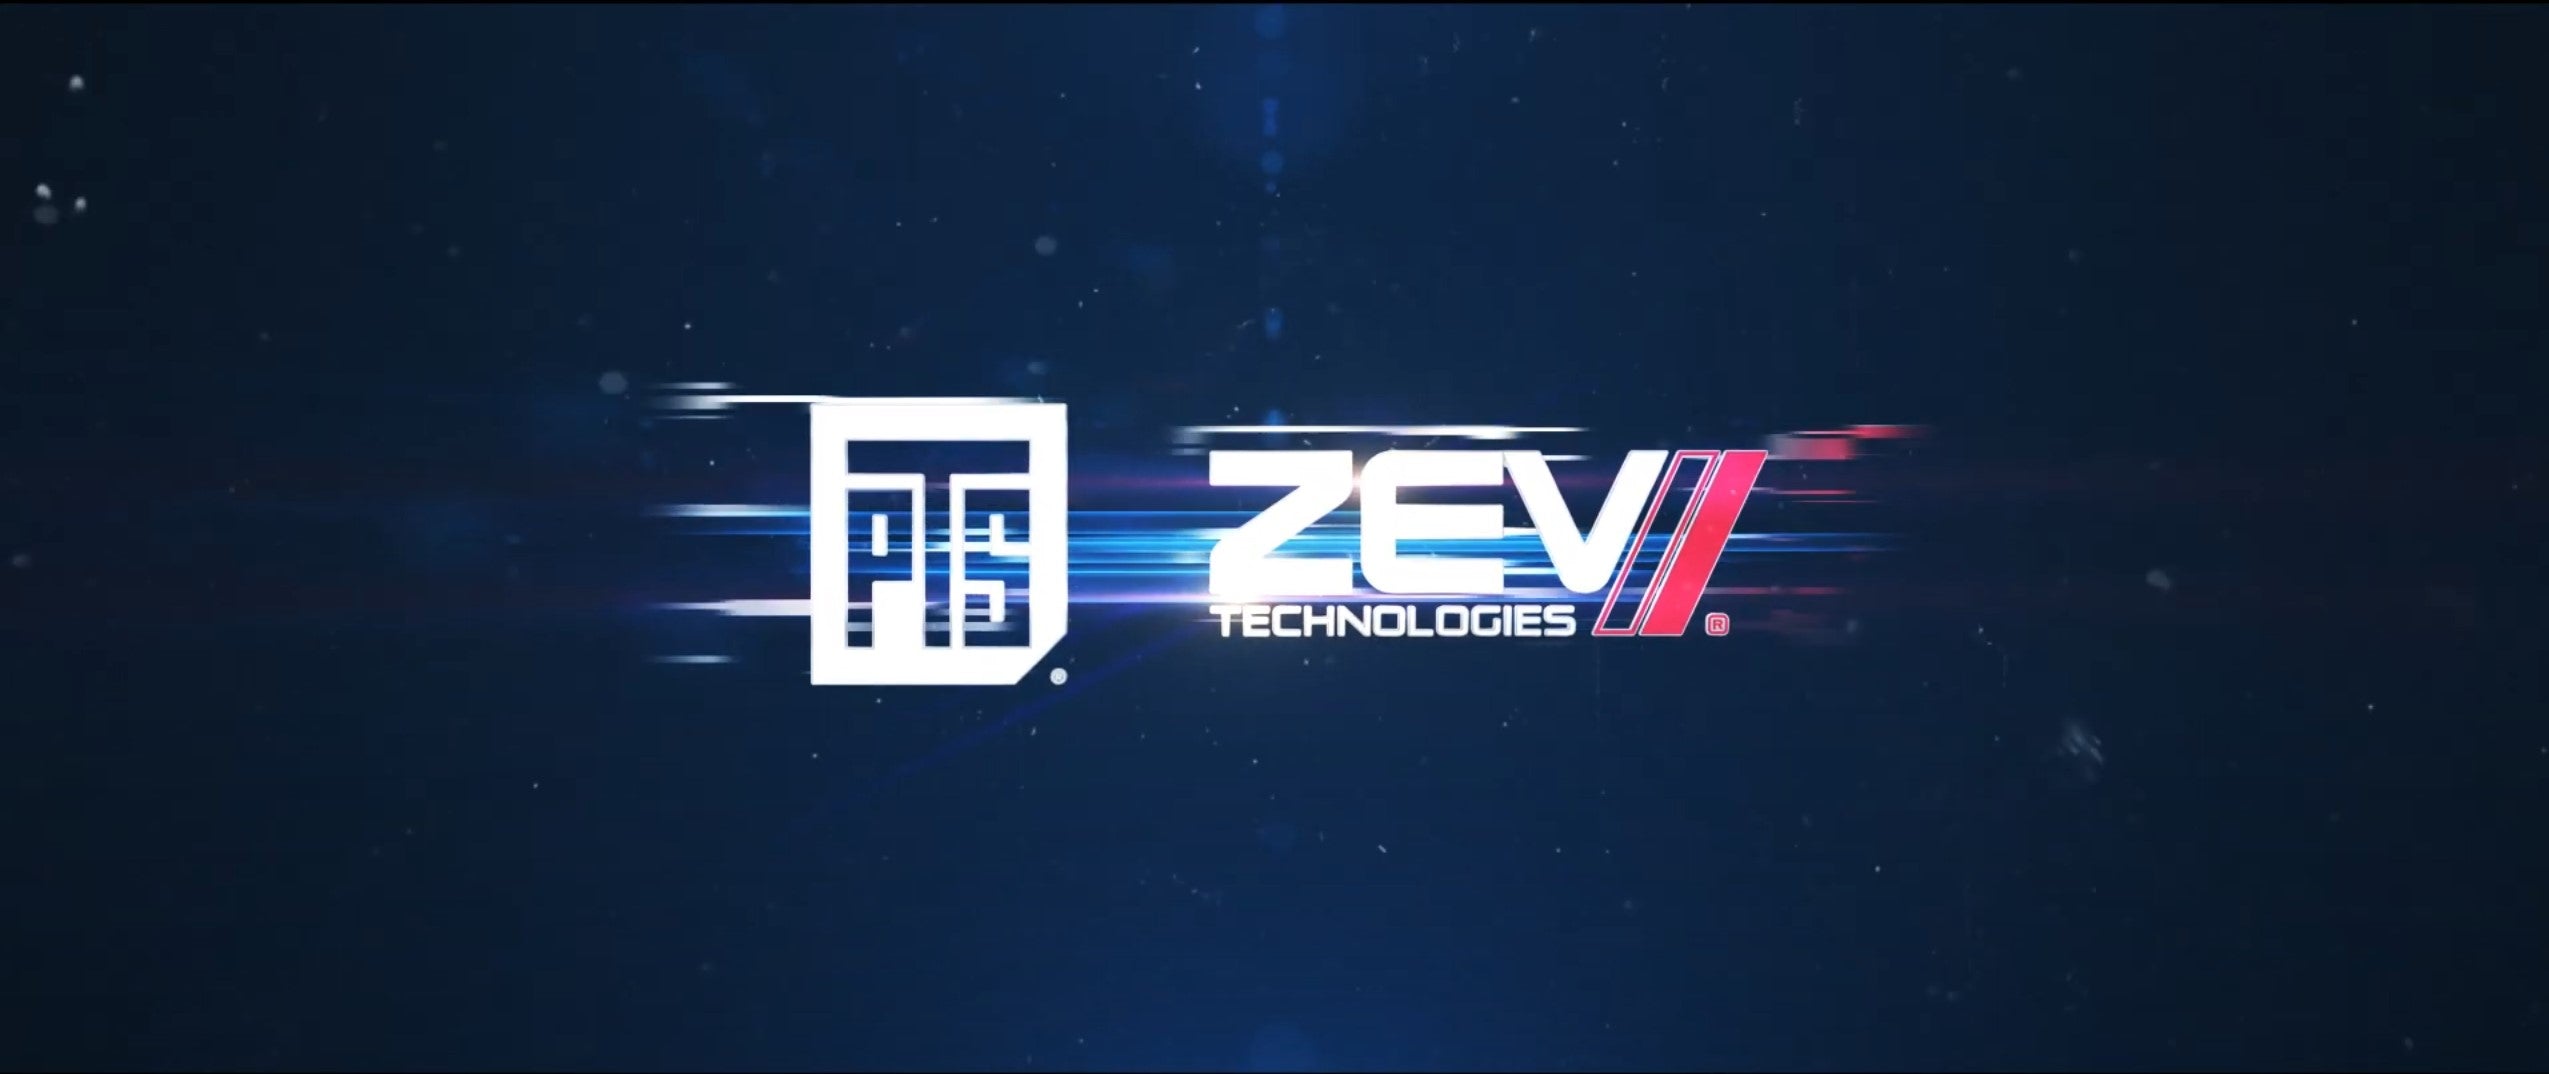 PTS ZEV coming soon…